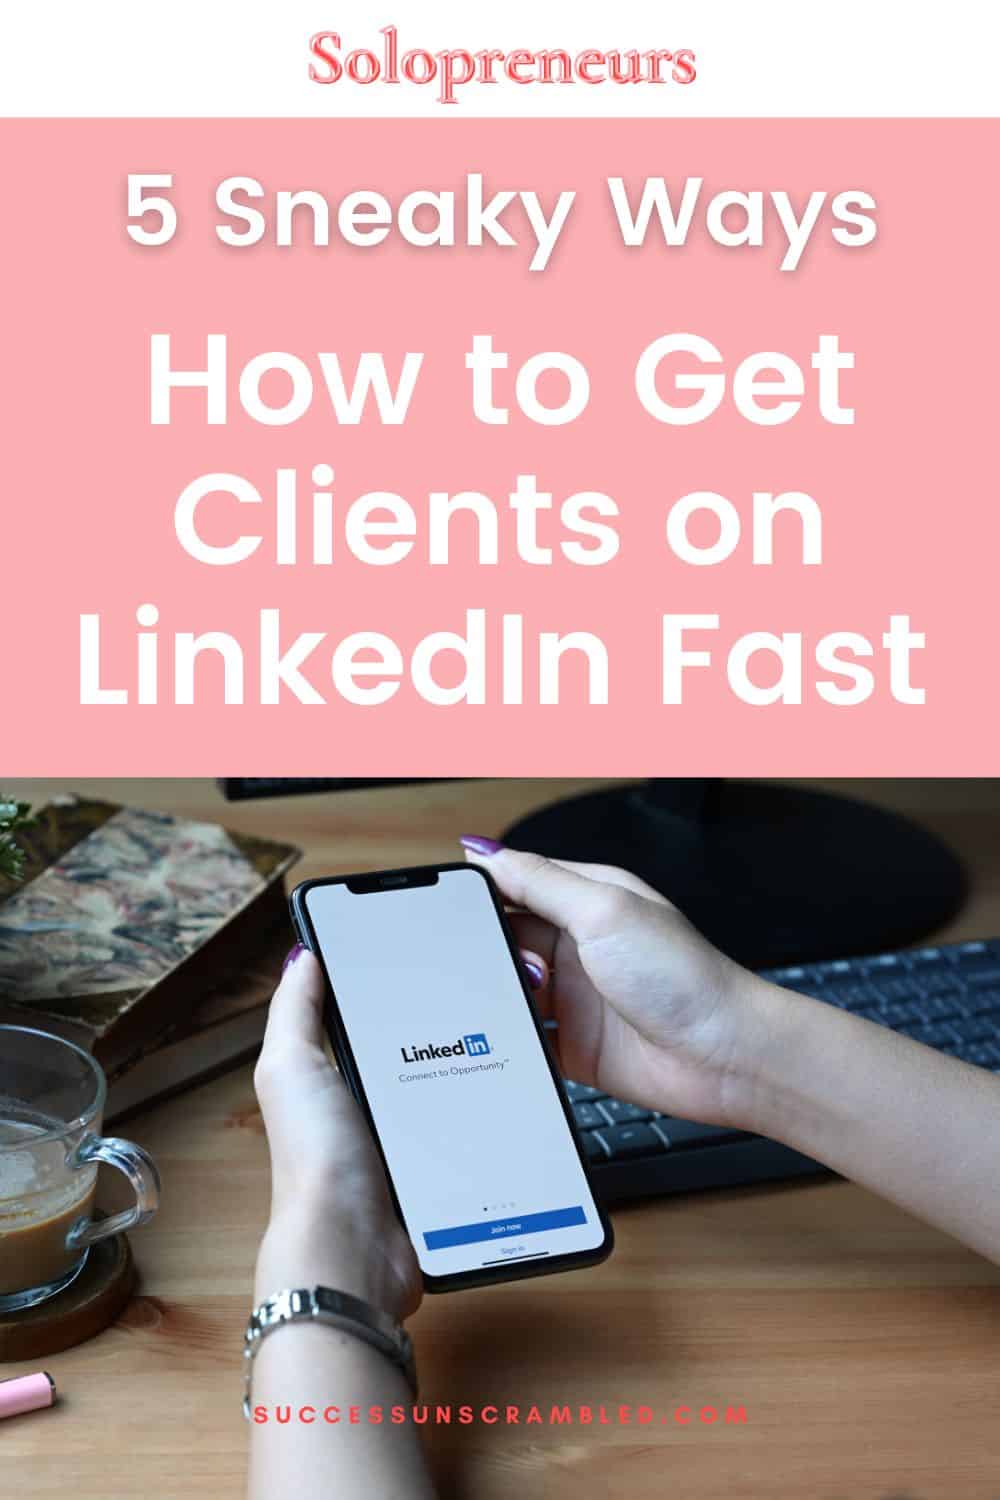 Photo of someone holding a smartphone as they learn how to get clients on LinkedIn